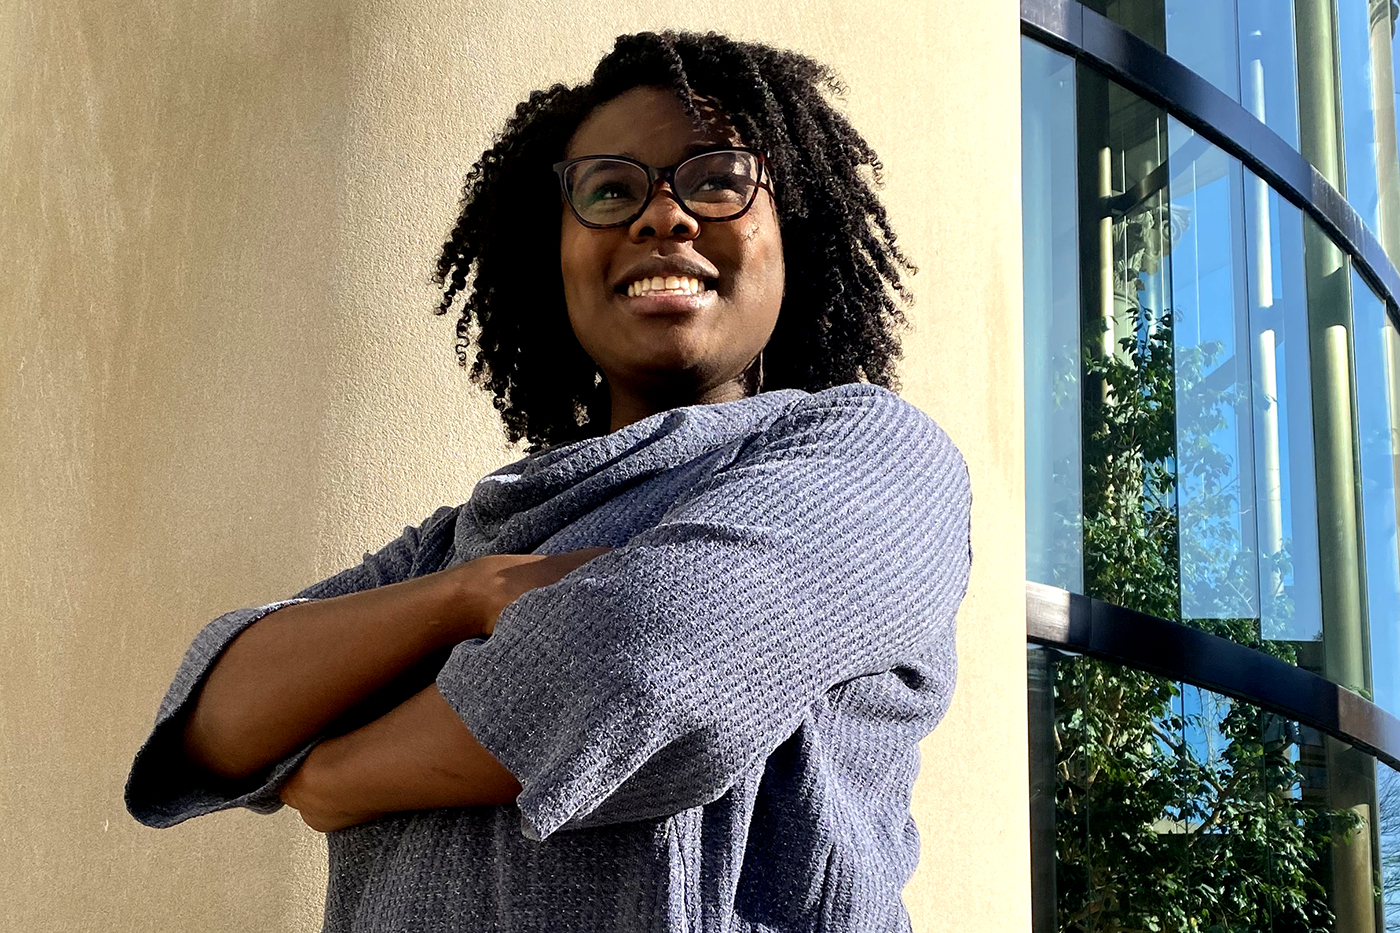 Black people are underrepresented in medical research. She wants to change that. 